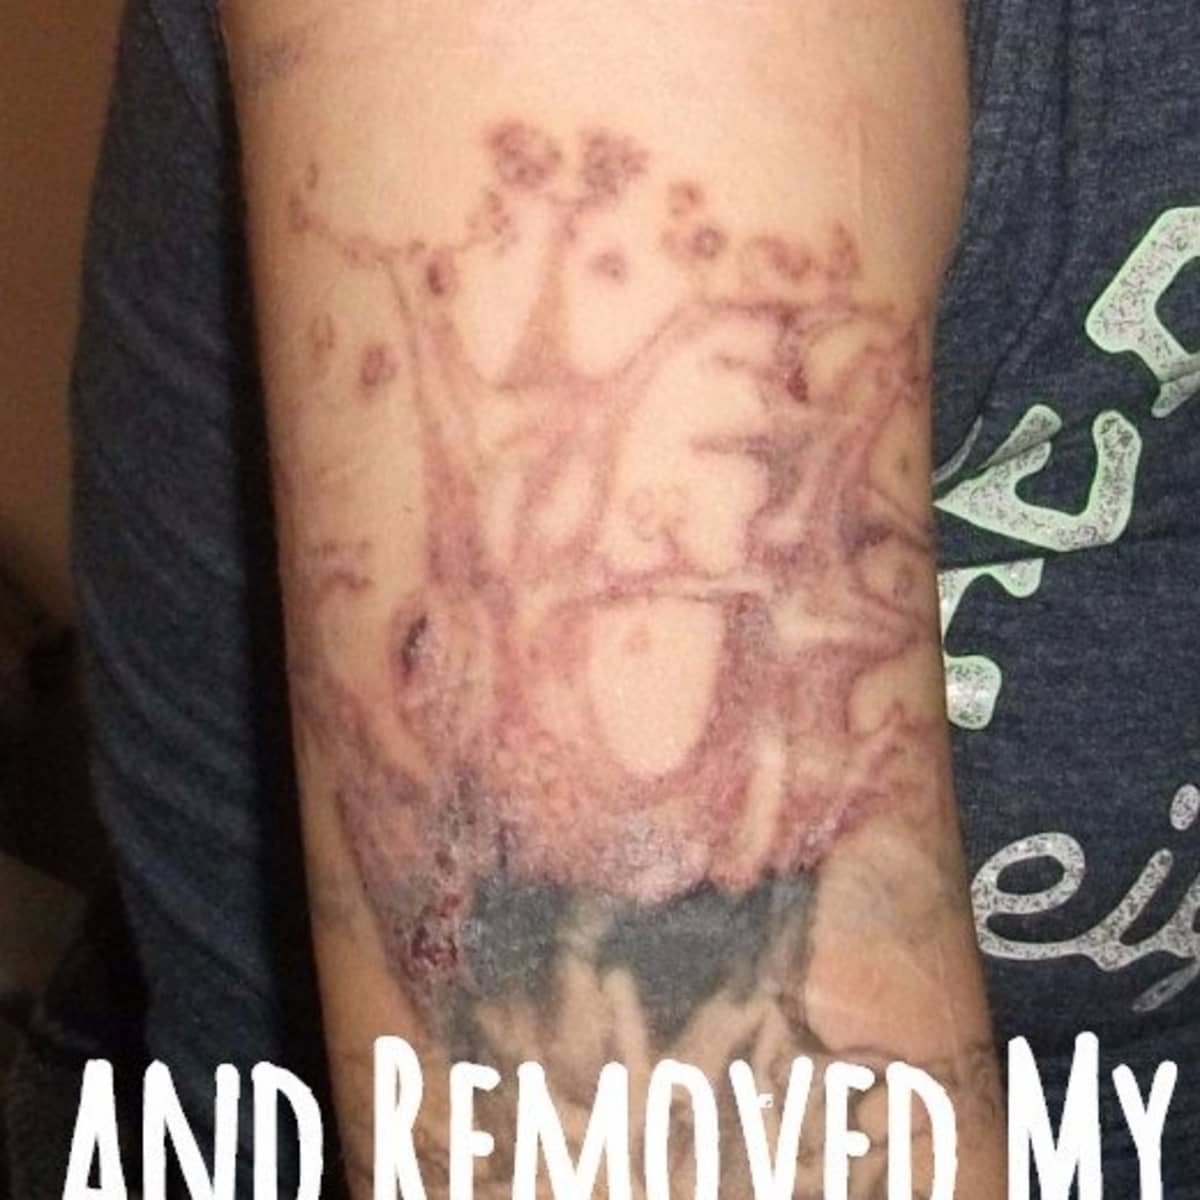 How To Remove A Tattoo At Home Quickly / At Home Tattoo Removal Methods ...